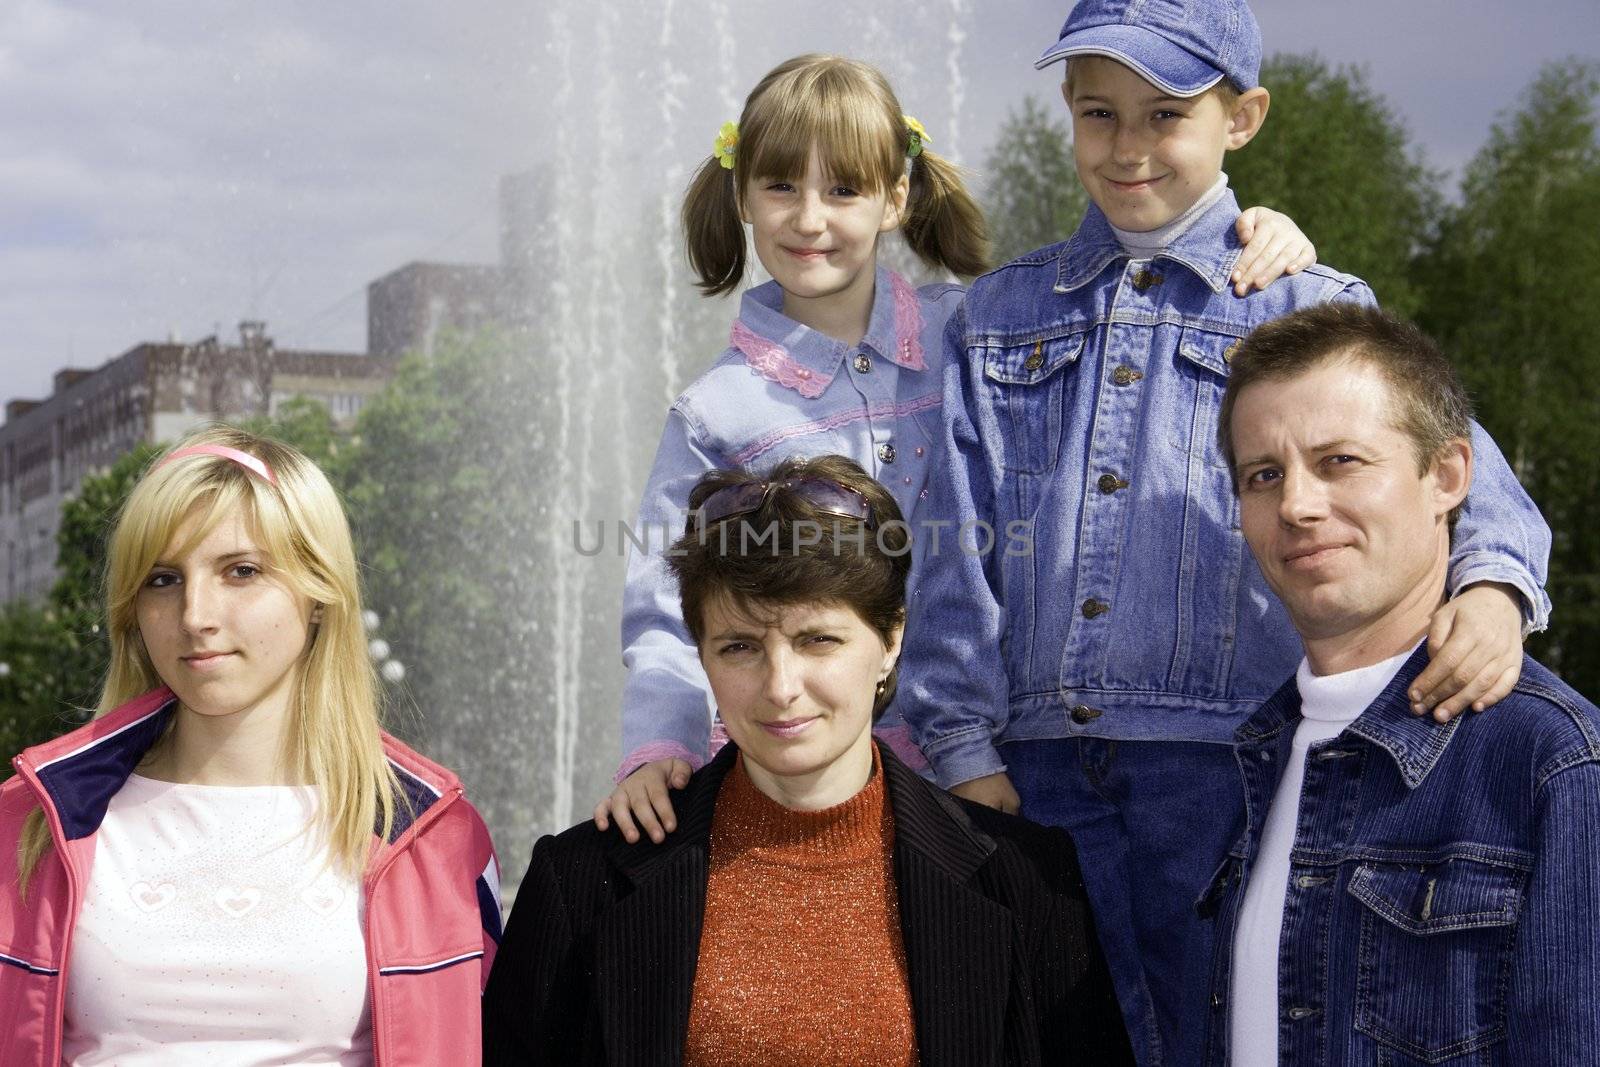 Family against a fountain and the sky with clouds by Sergey_Shulgin